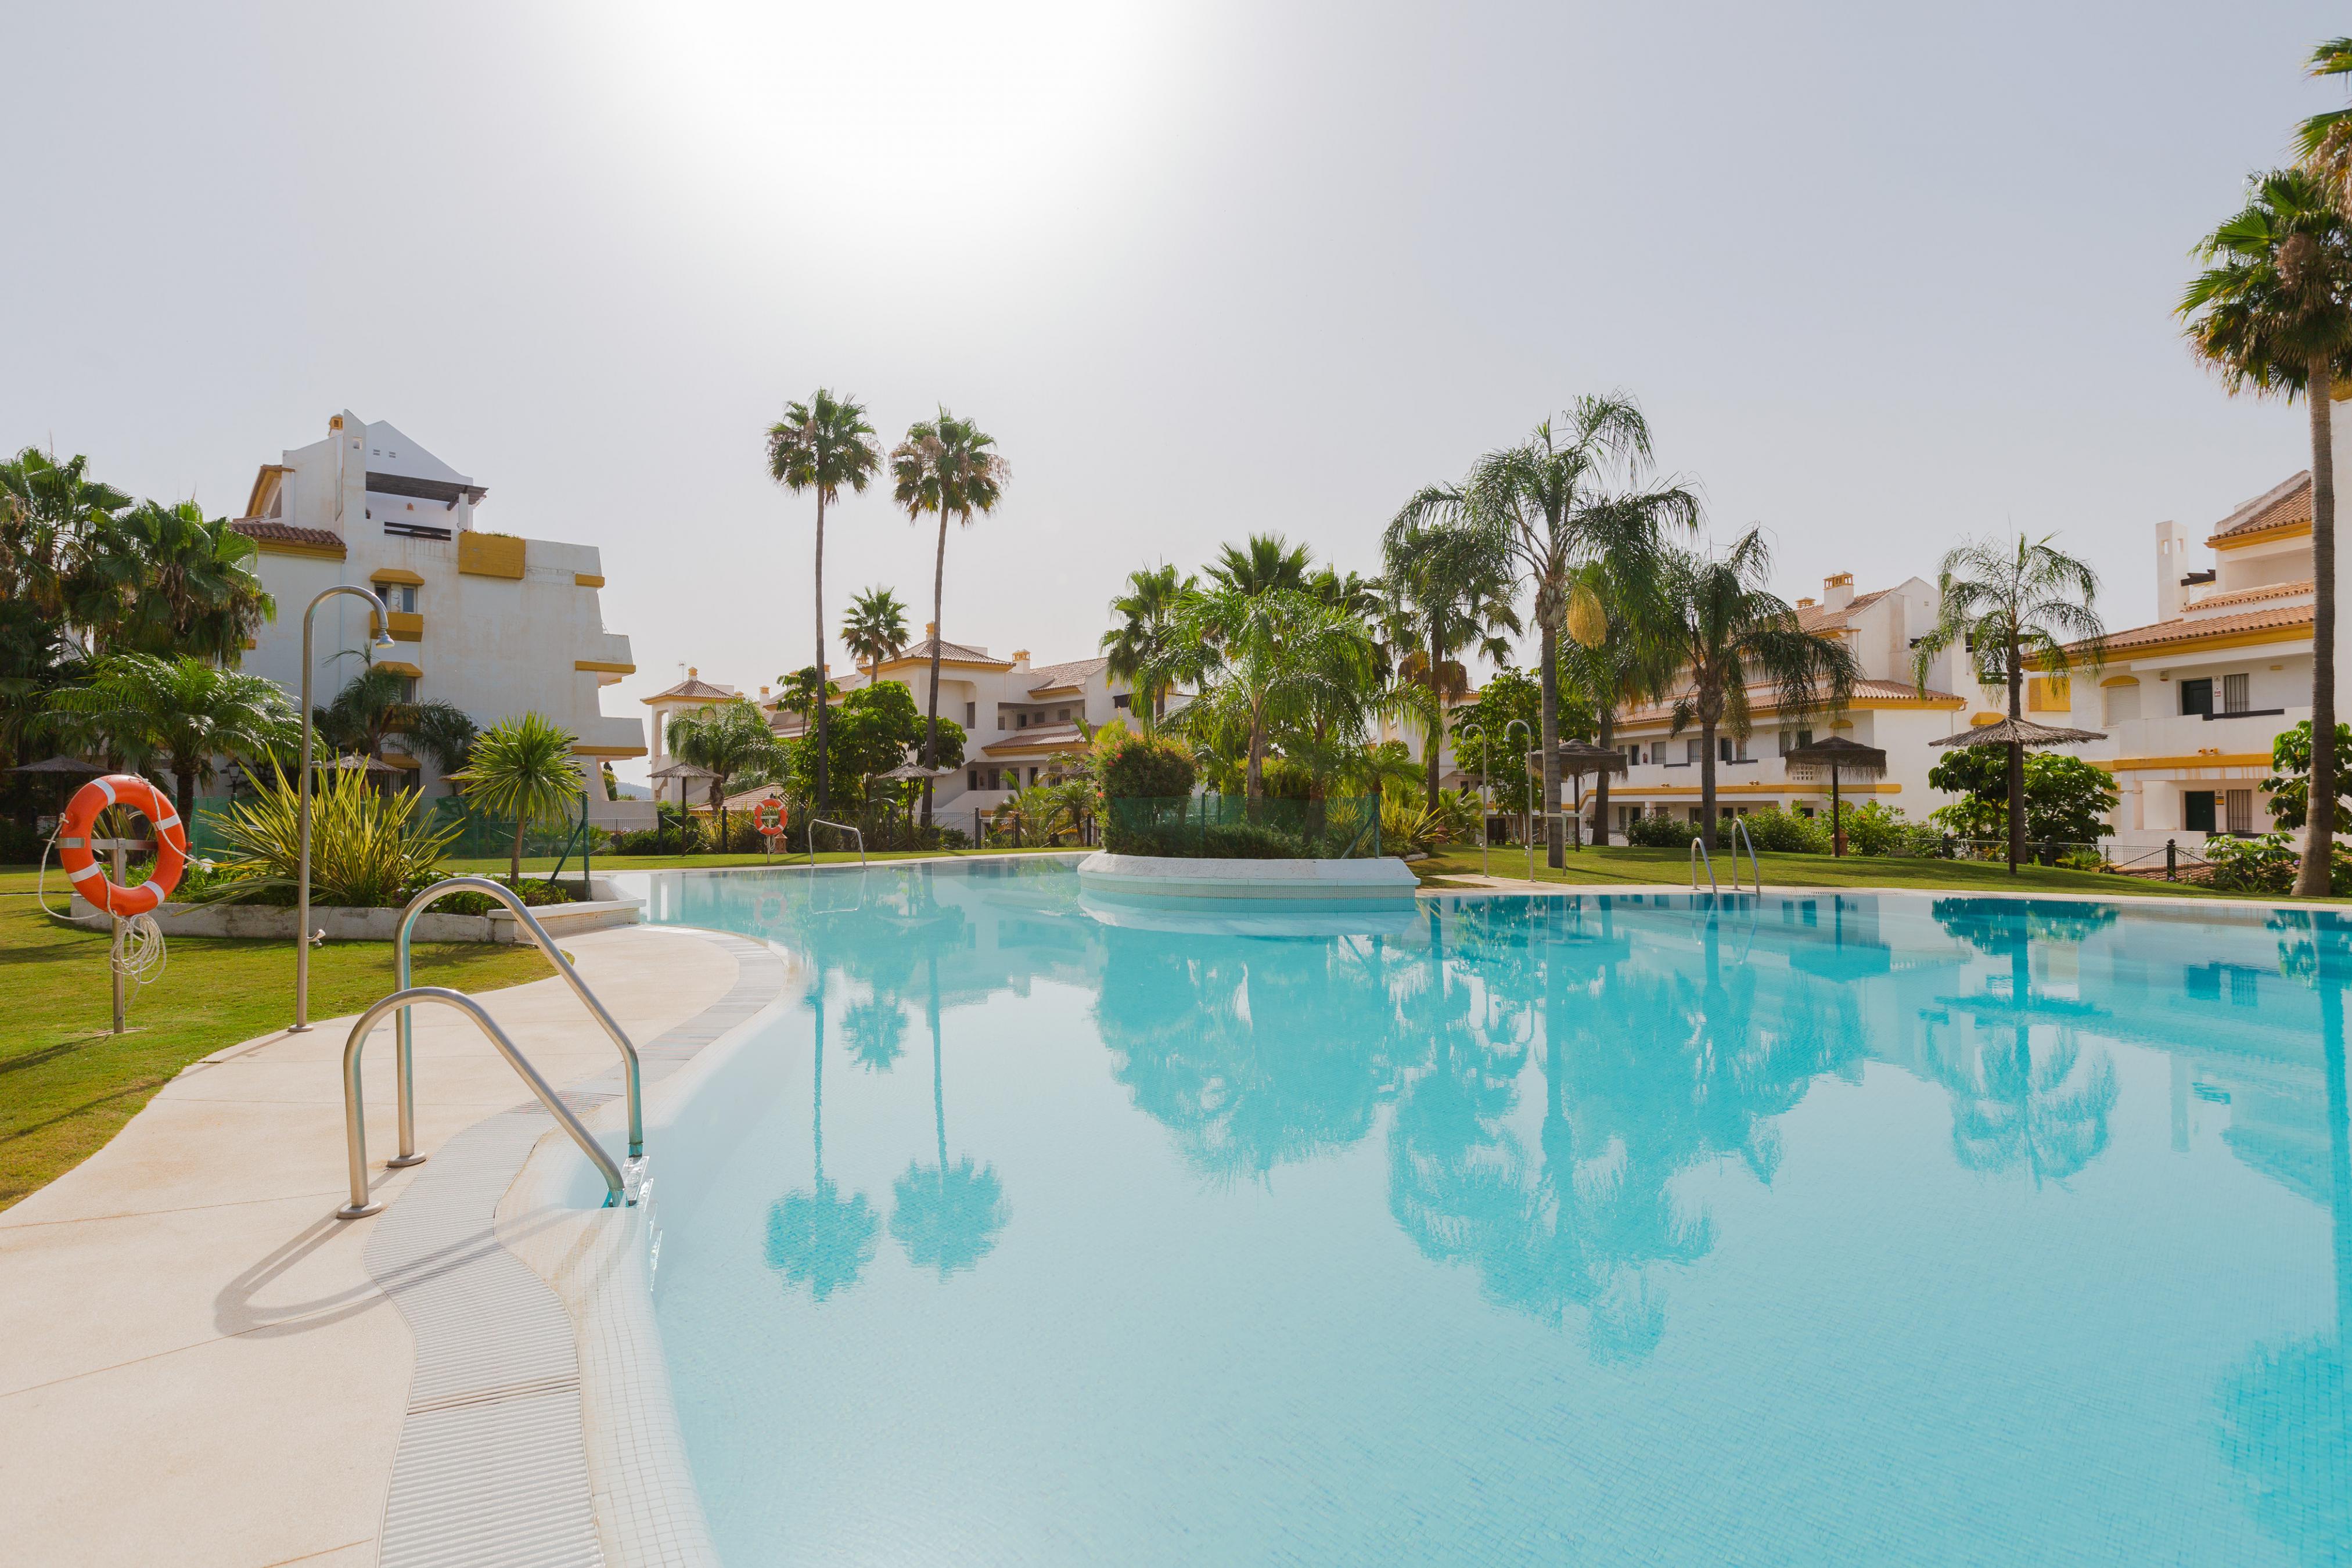 Property Image 2 - CALANOVA - Magnificent apartment with shared pool and free WiFi